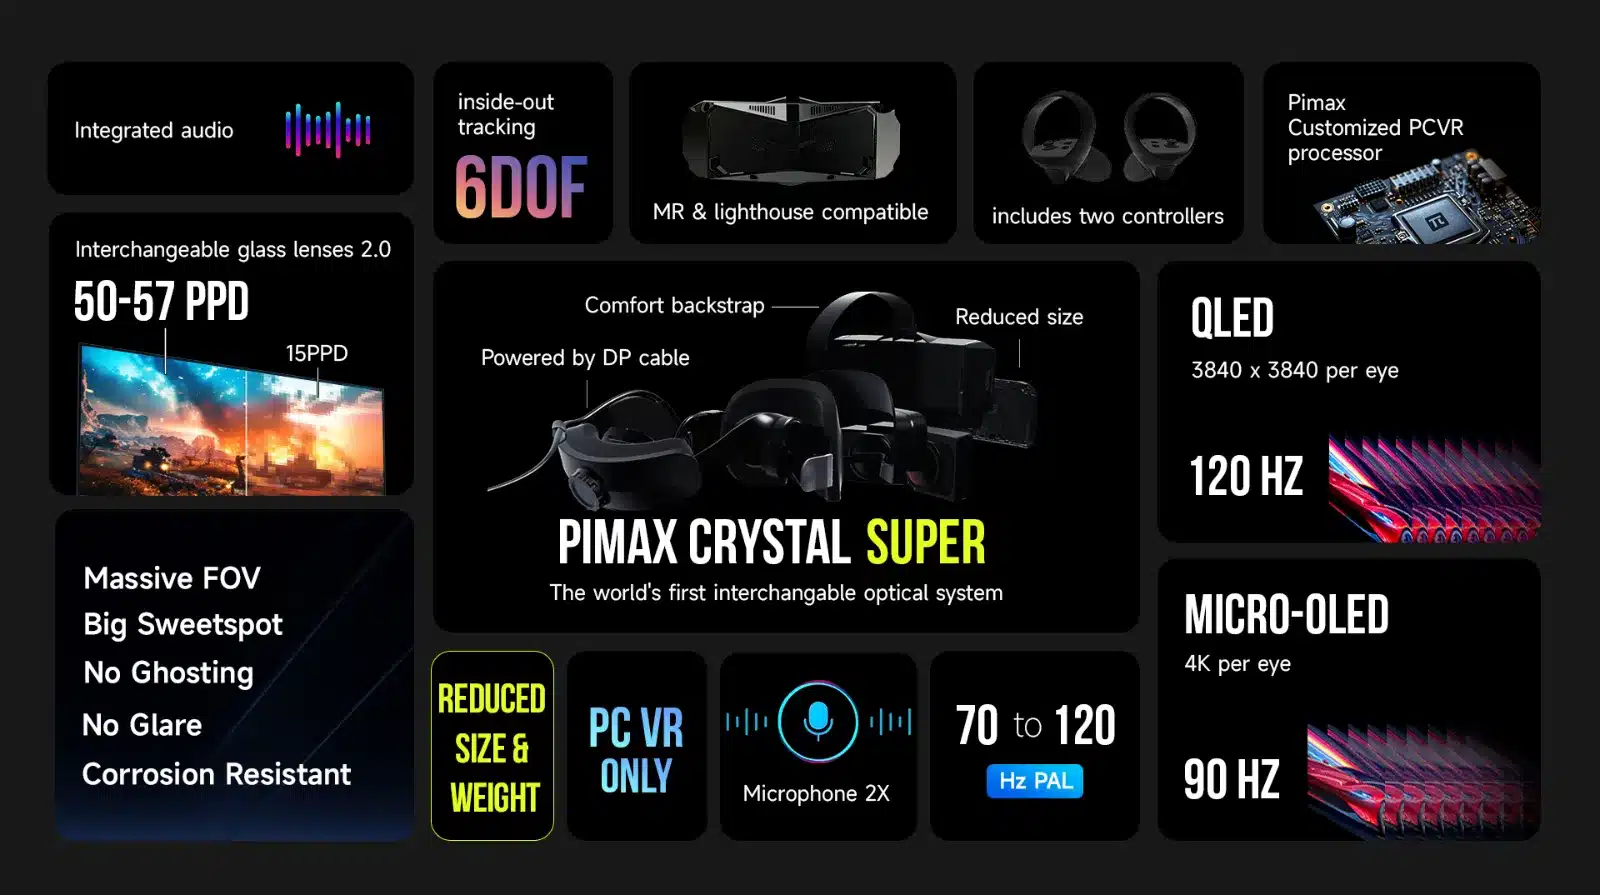 Infographic of Pimax Crystal Super VR features.